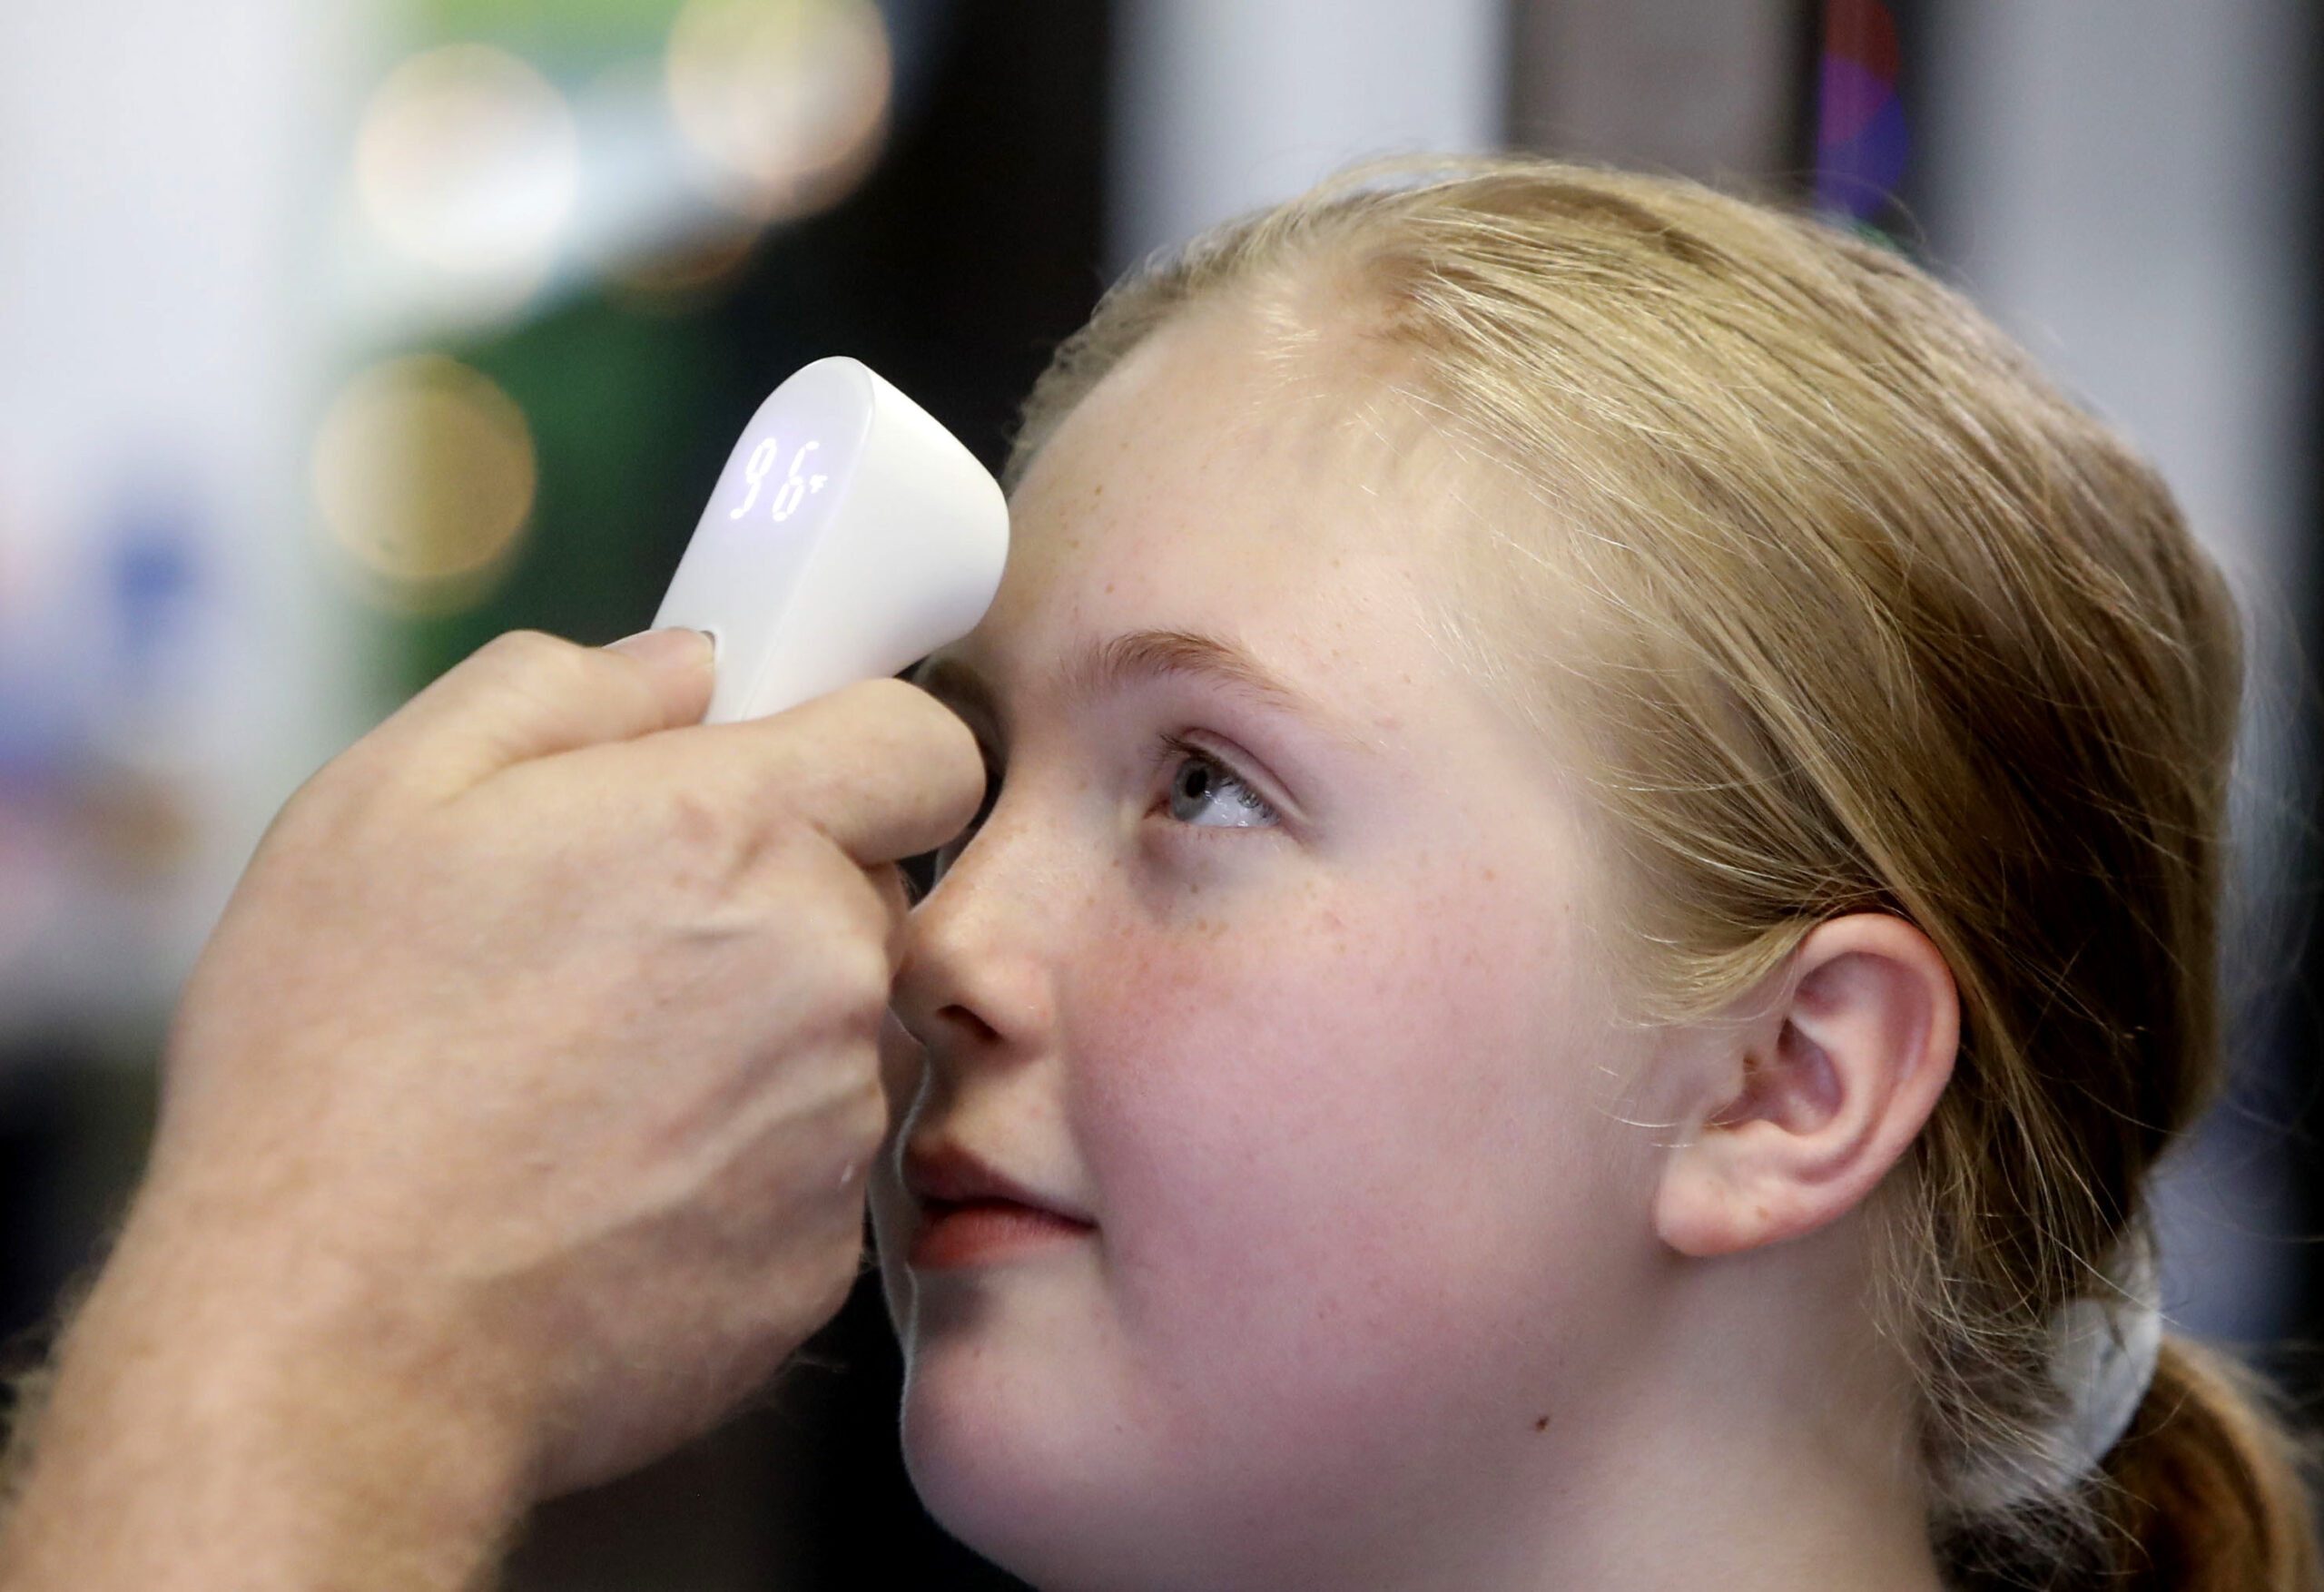 Kaiden Melton, 12, has her temperature taken during a daycare summer camp